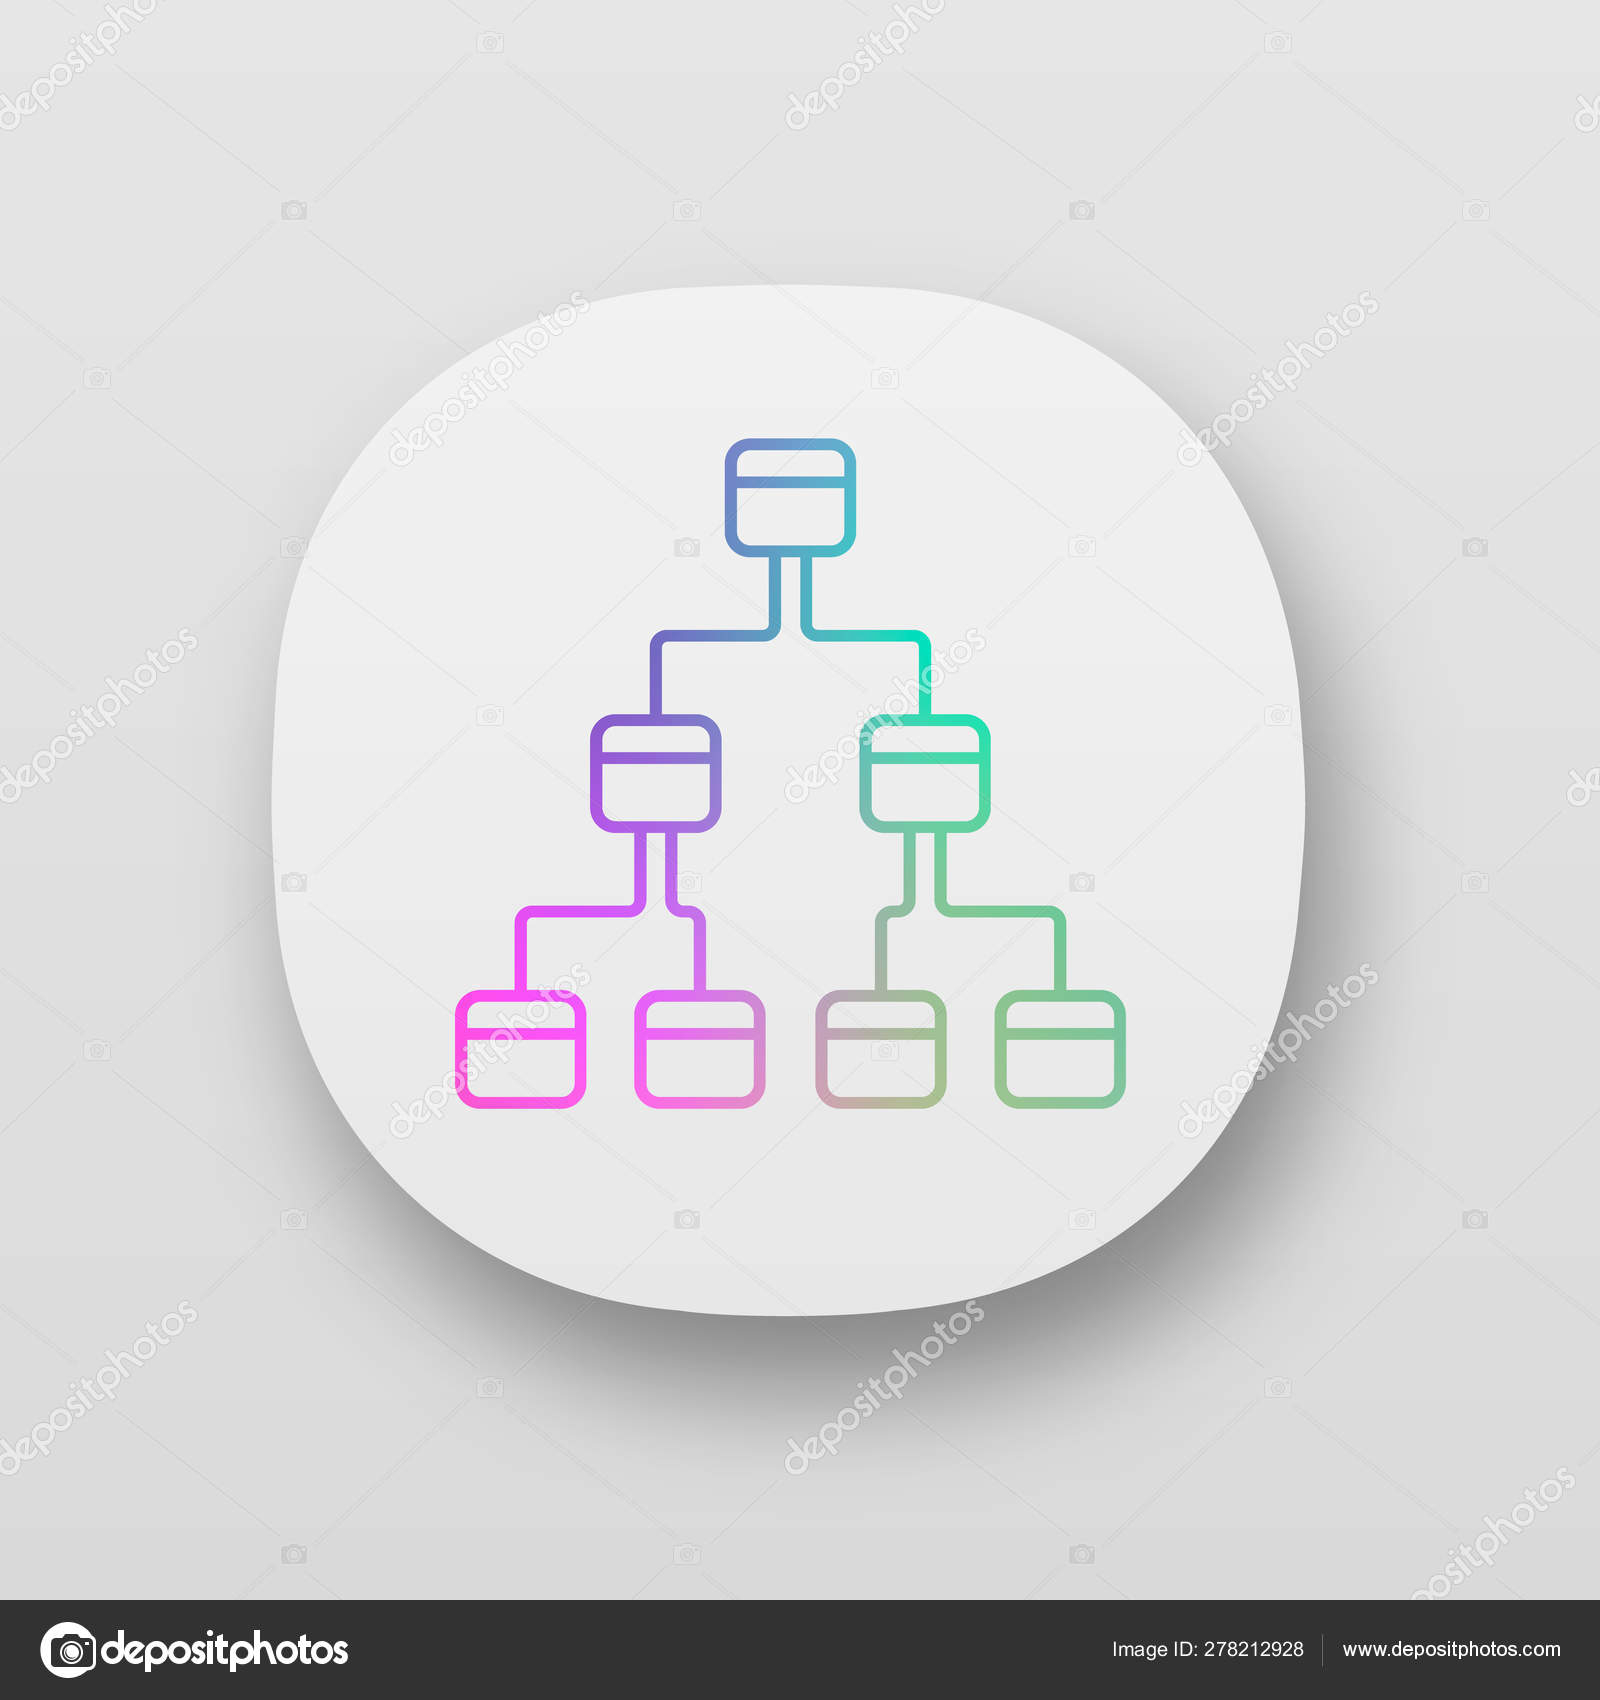 Tree Diagram Maker Tree Diagram App Icon 3 Space Ring Hierarchical System Node Link